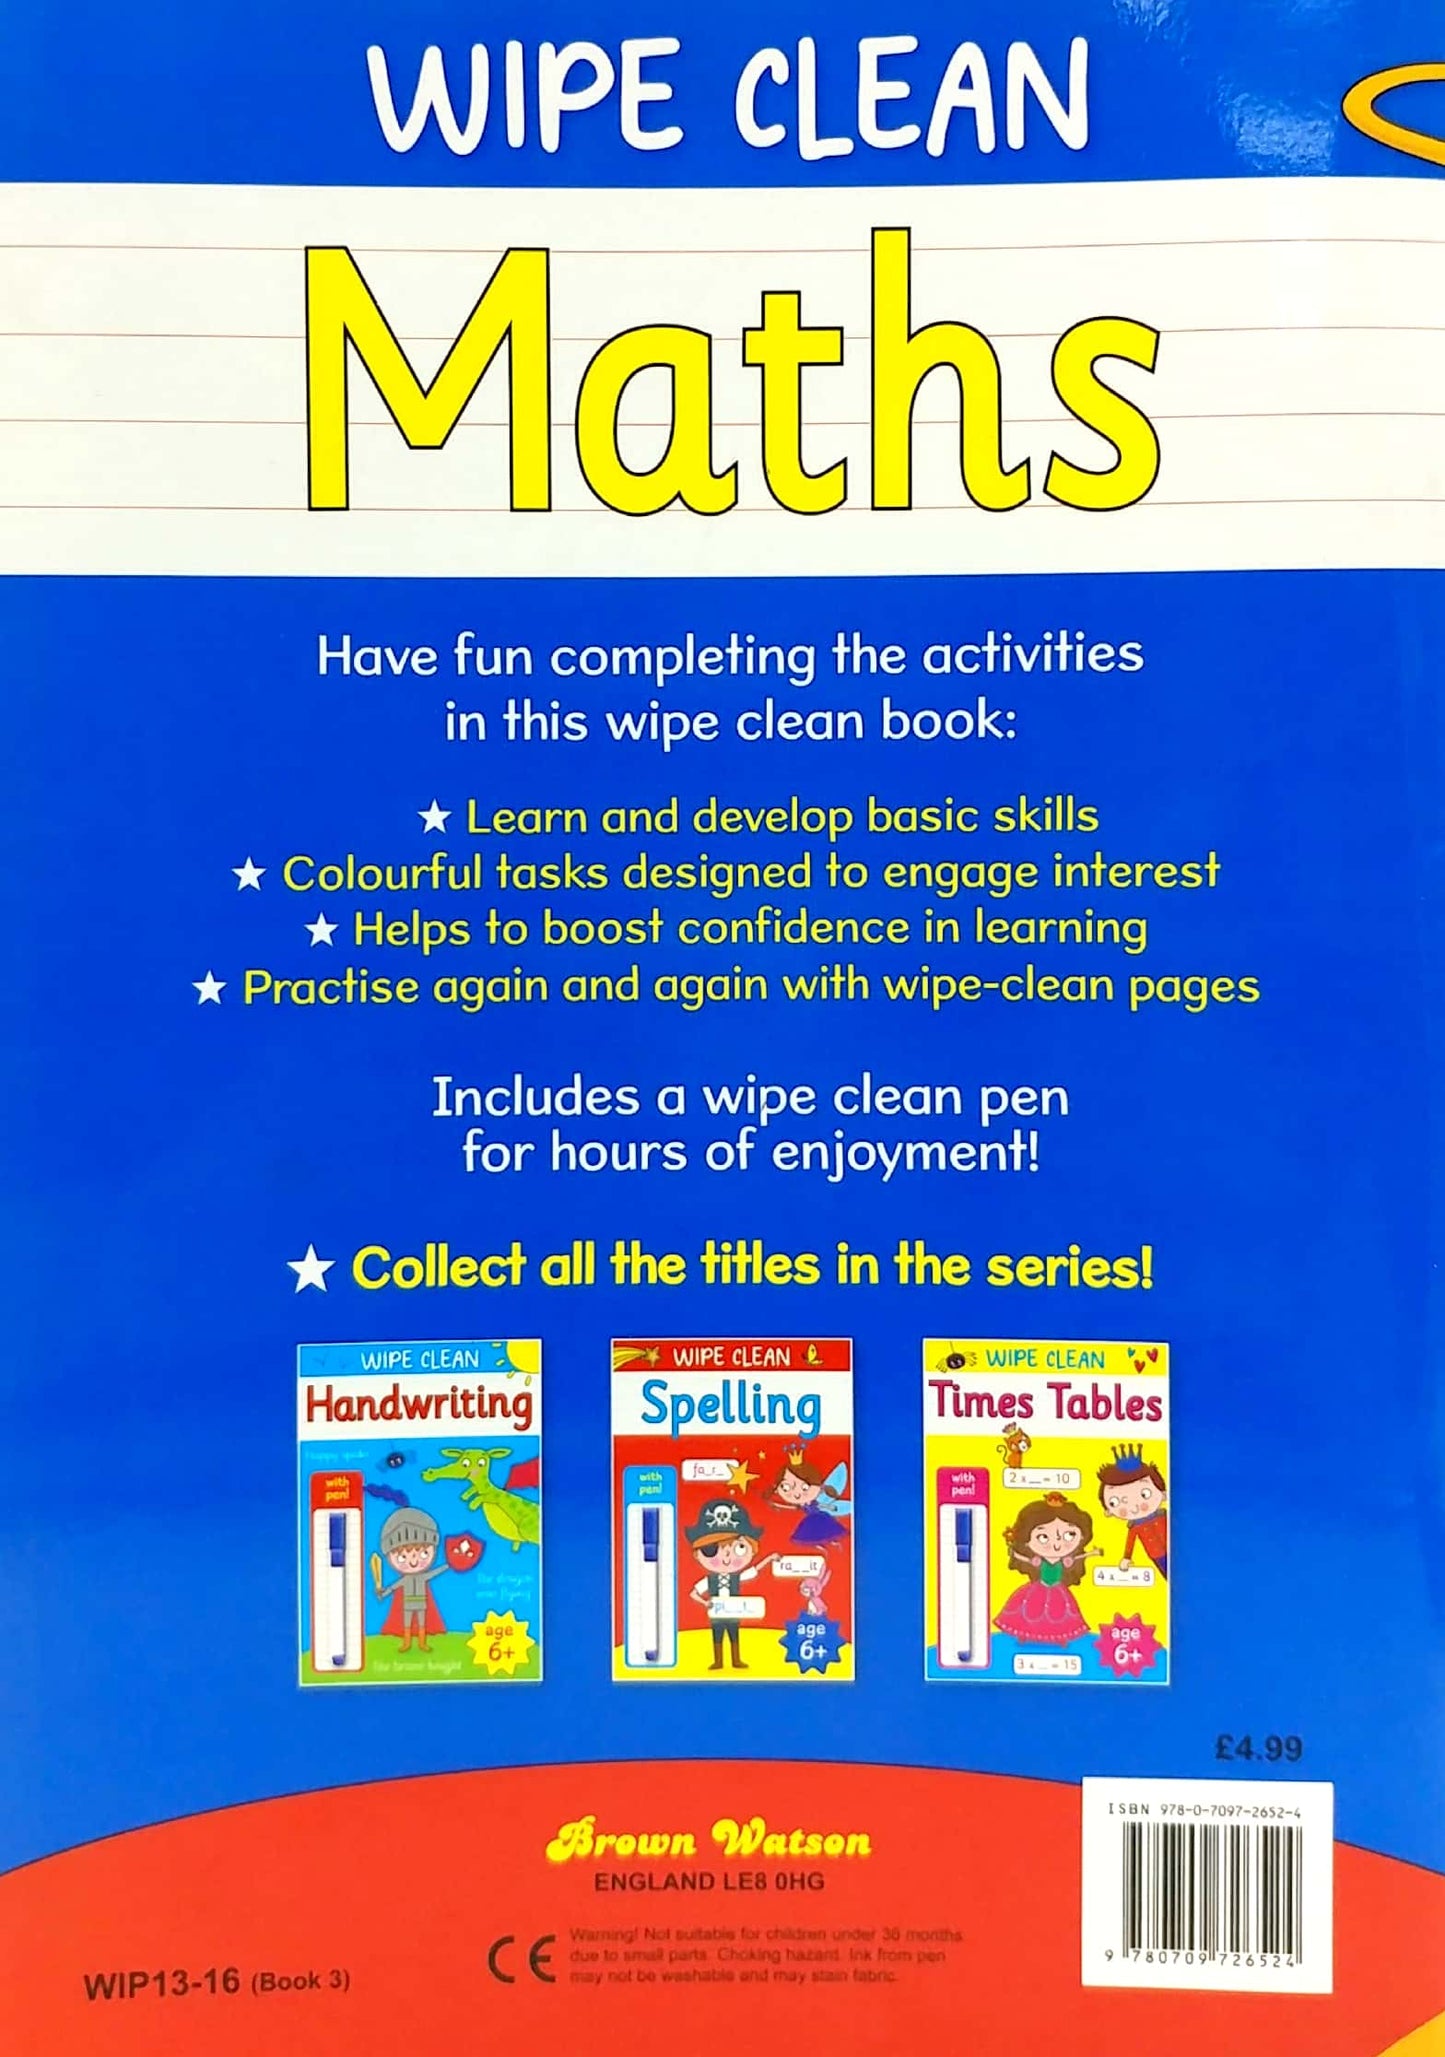 Wipe Clean Maths Book with Pen